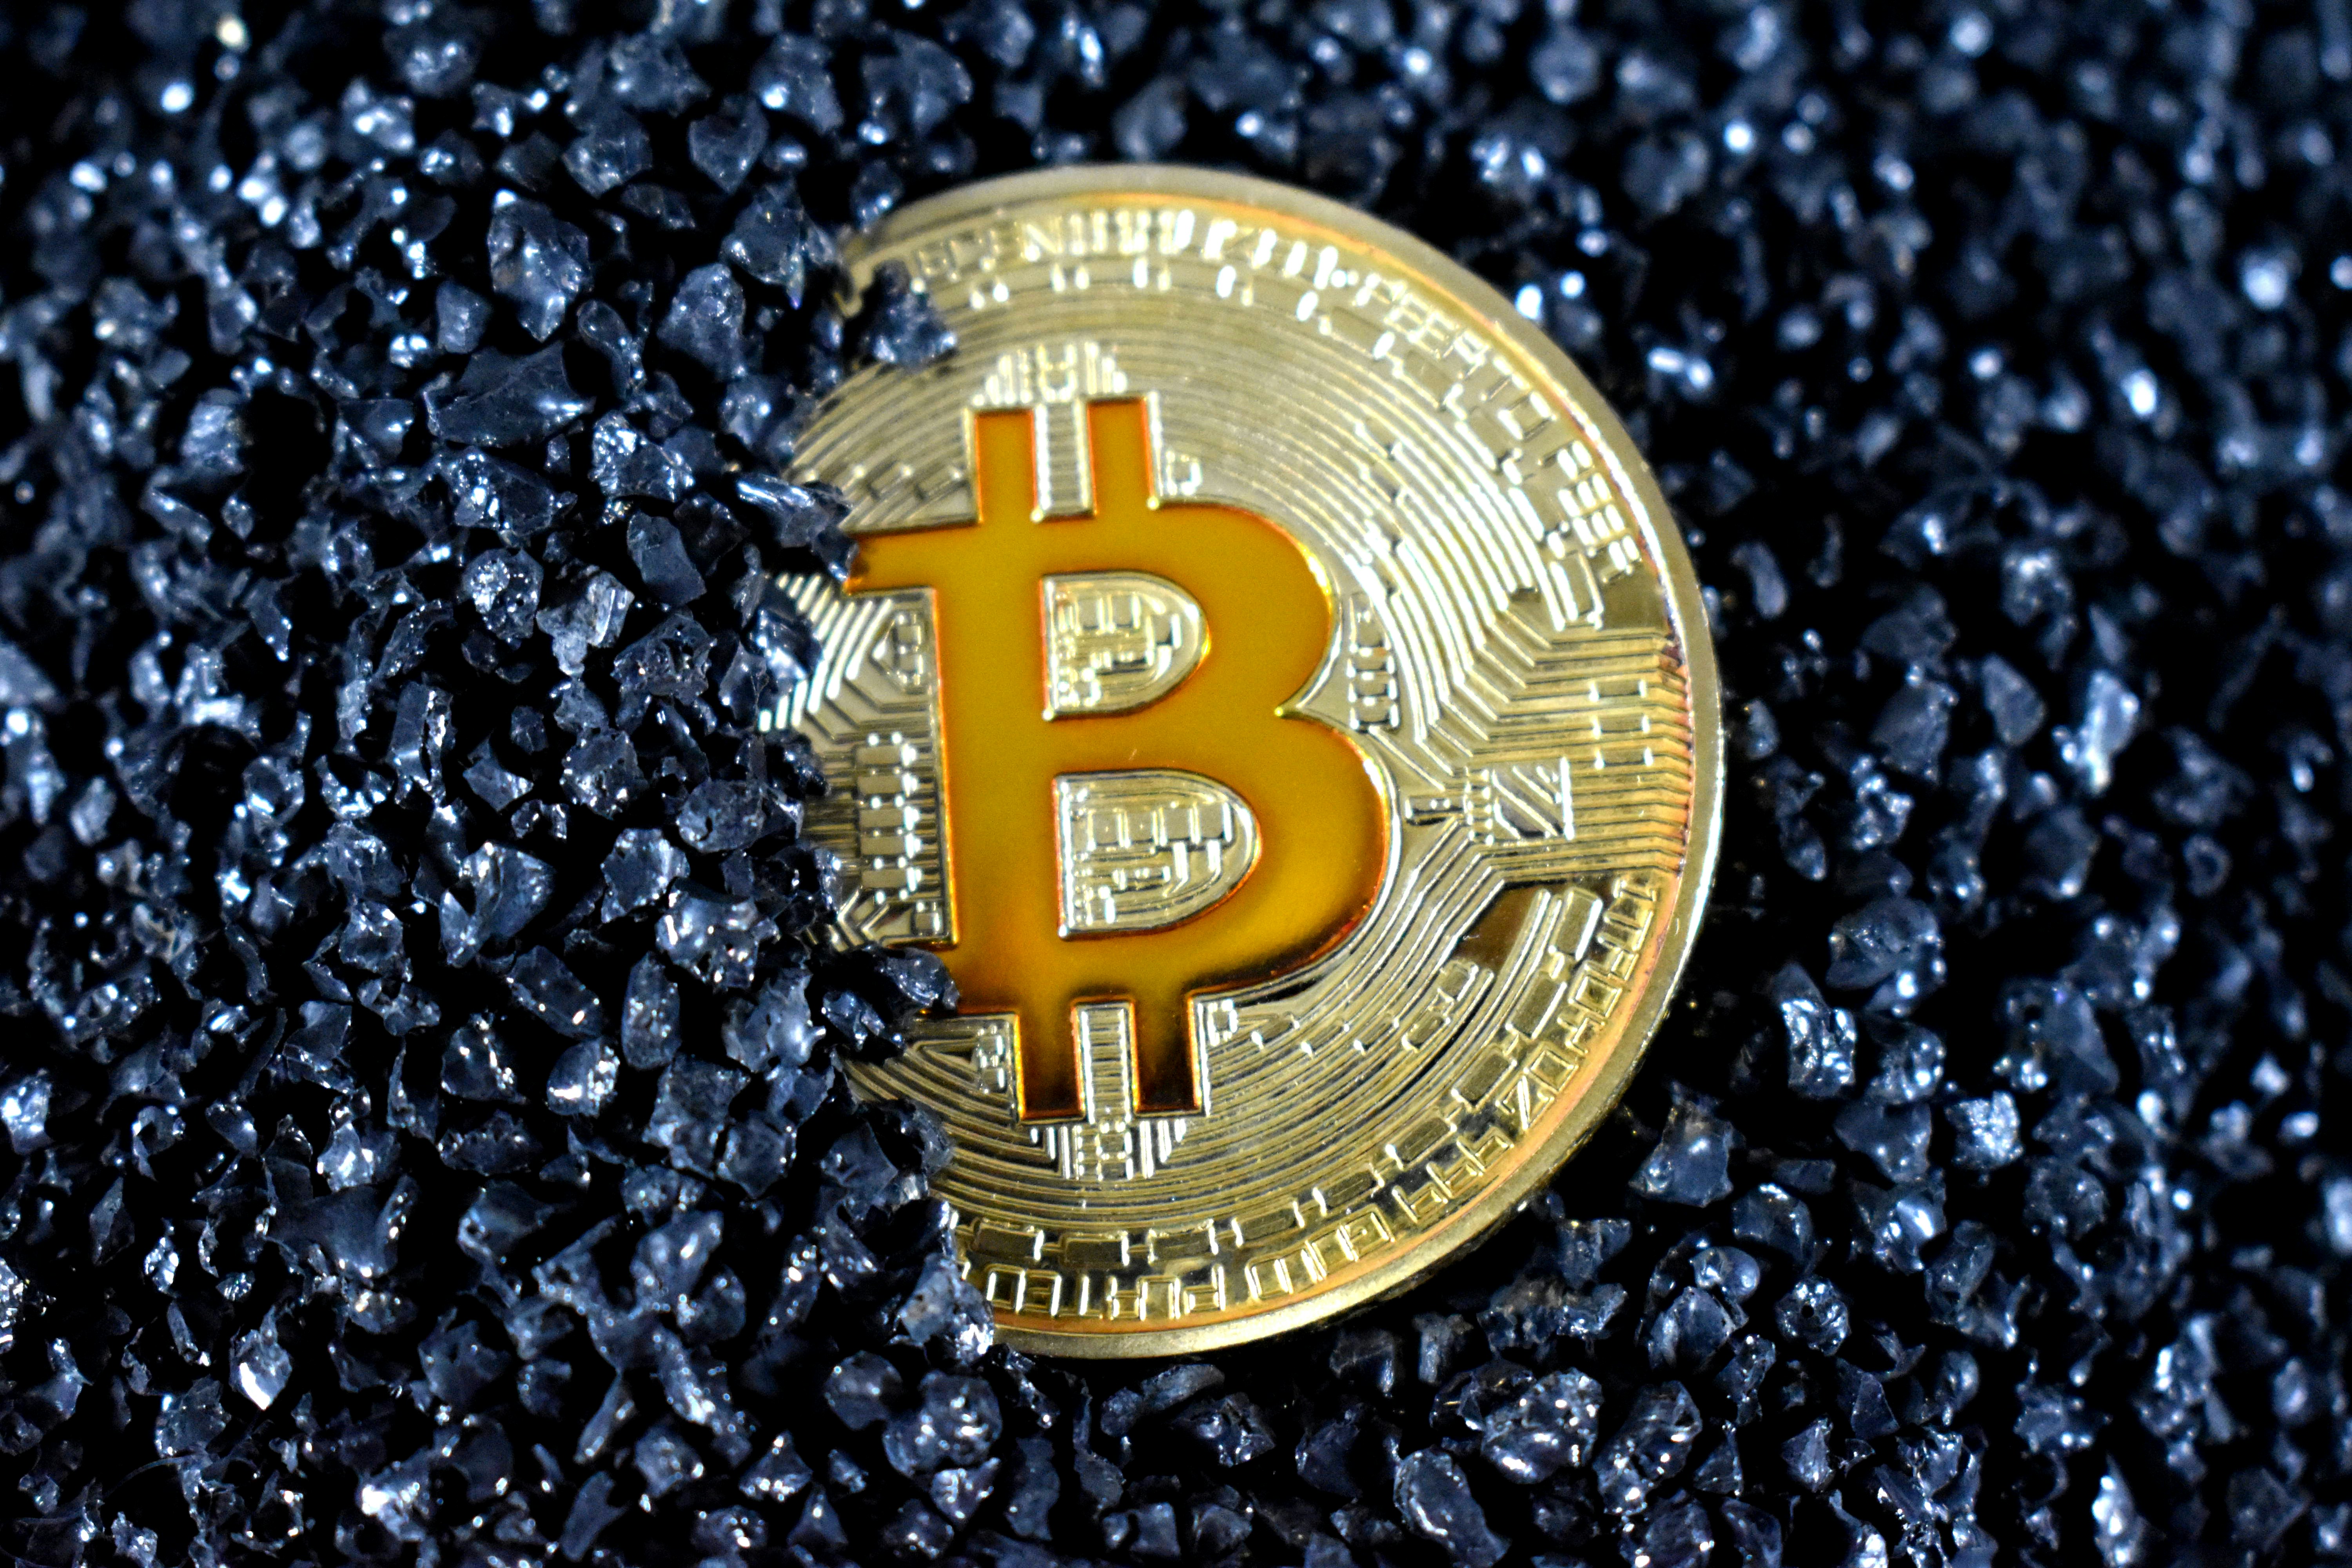 A Bitcoin half-covered in black crystals.